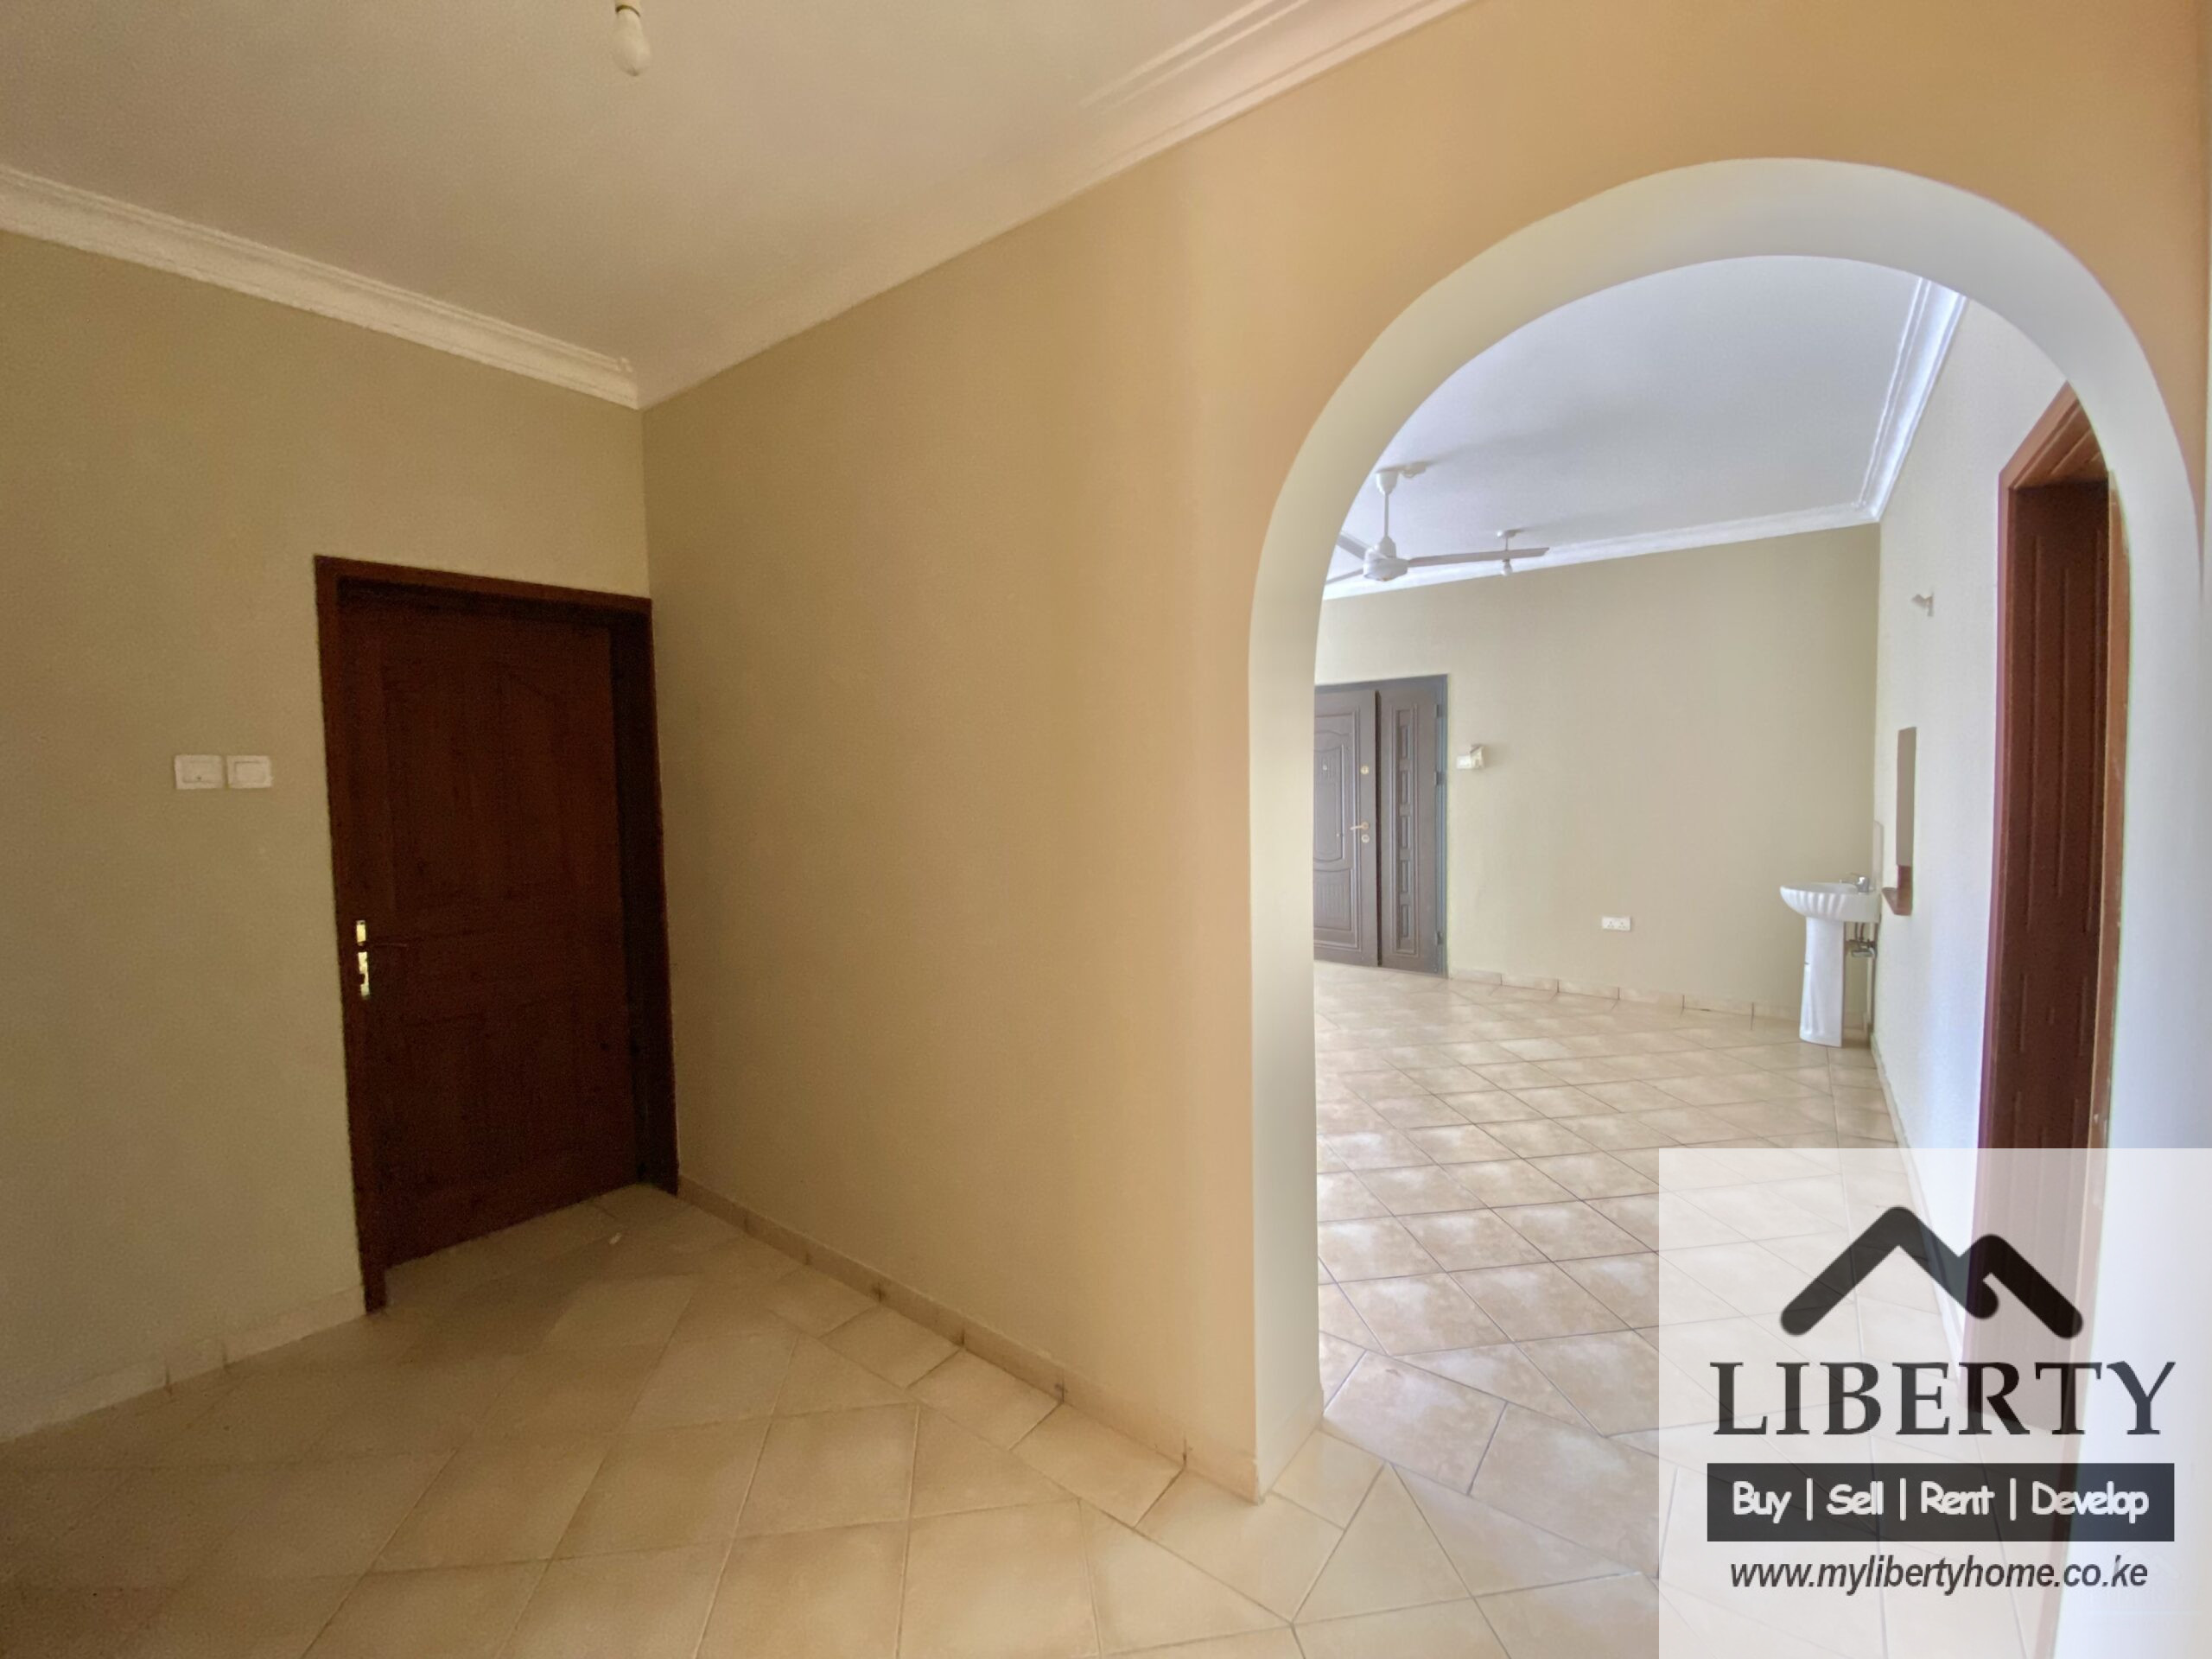 Executive 3 Bedroom Apartment In Mombasa-Nyali For Rent-65K- Ref-667